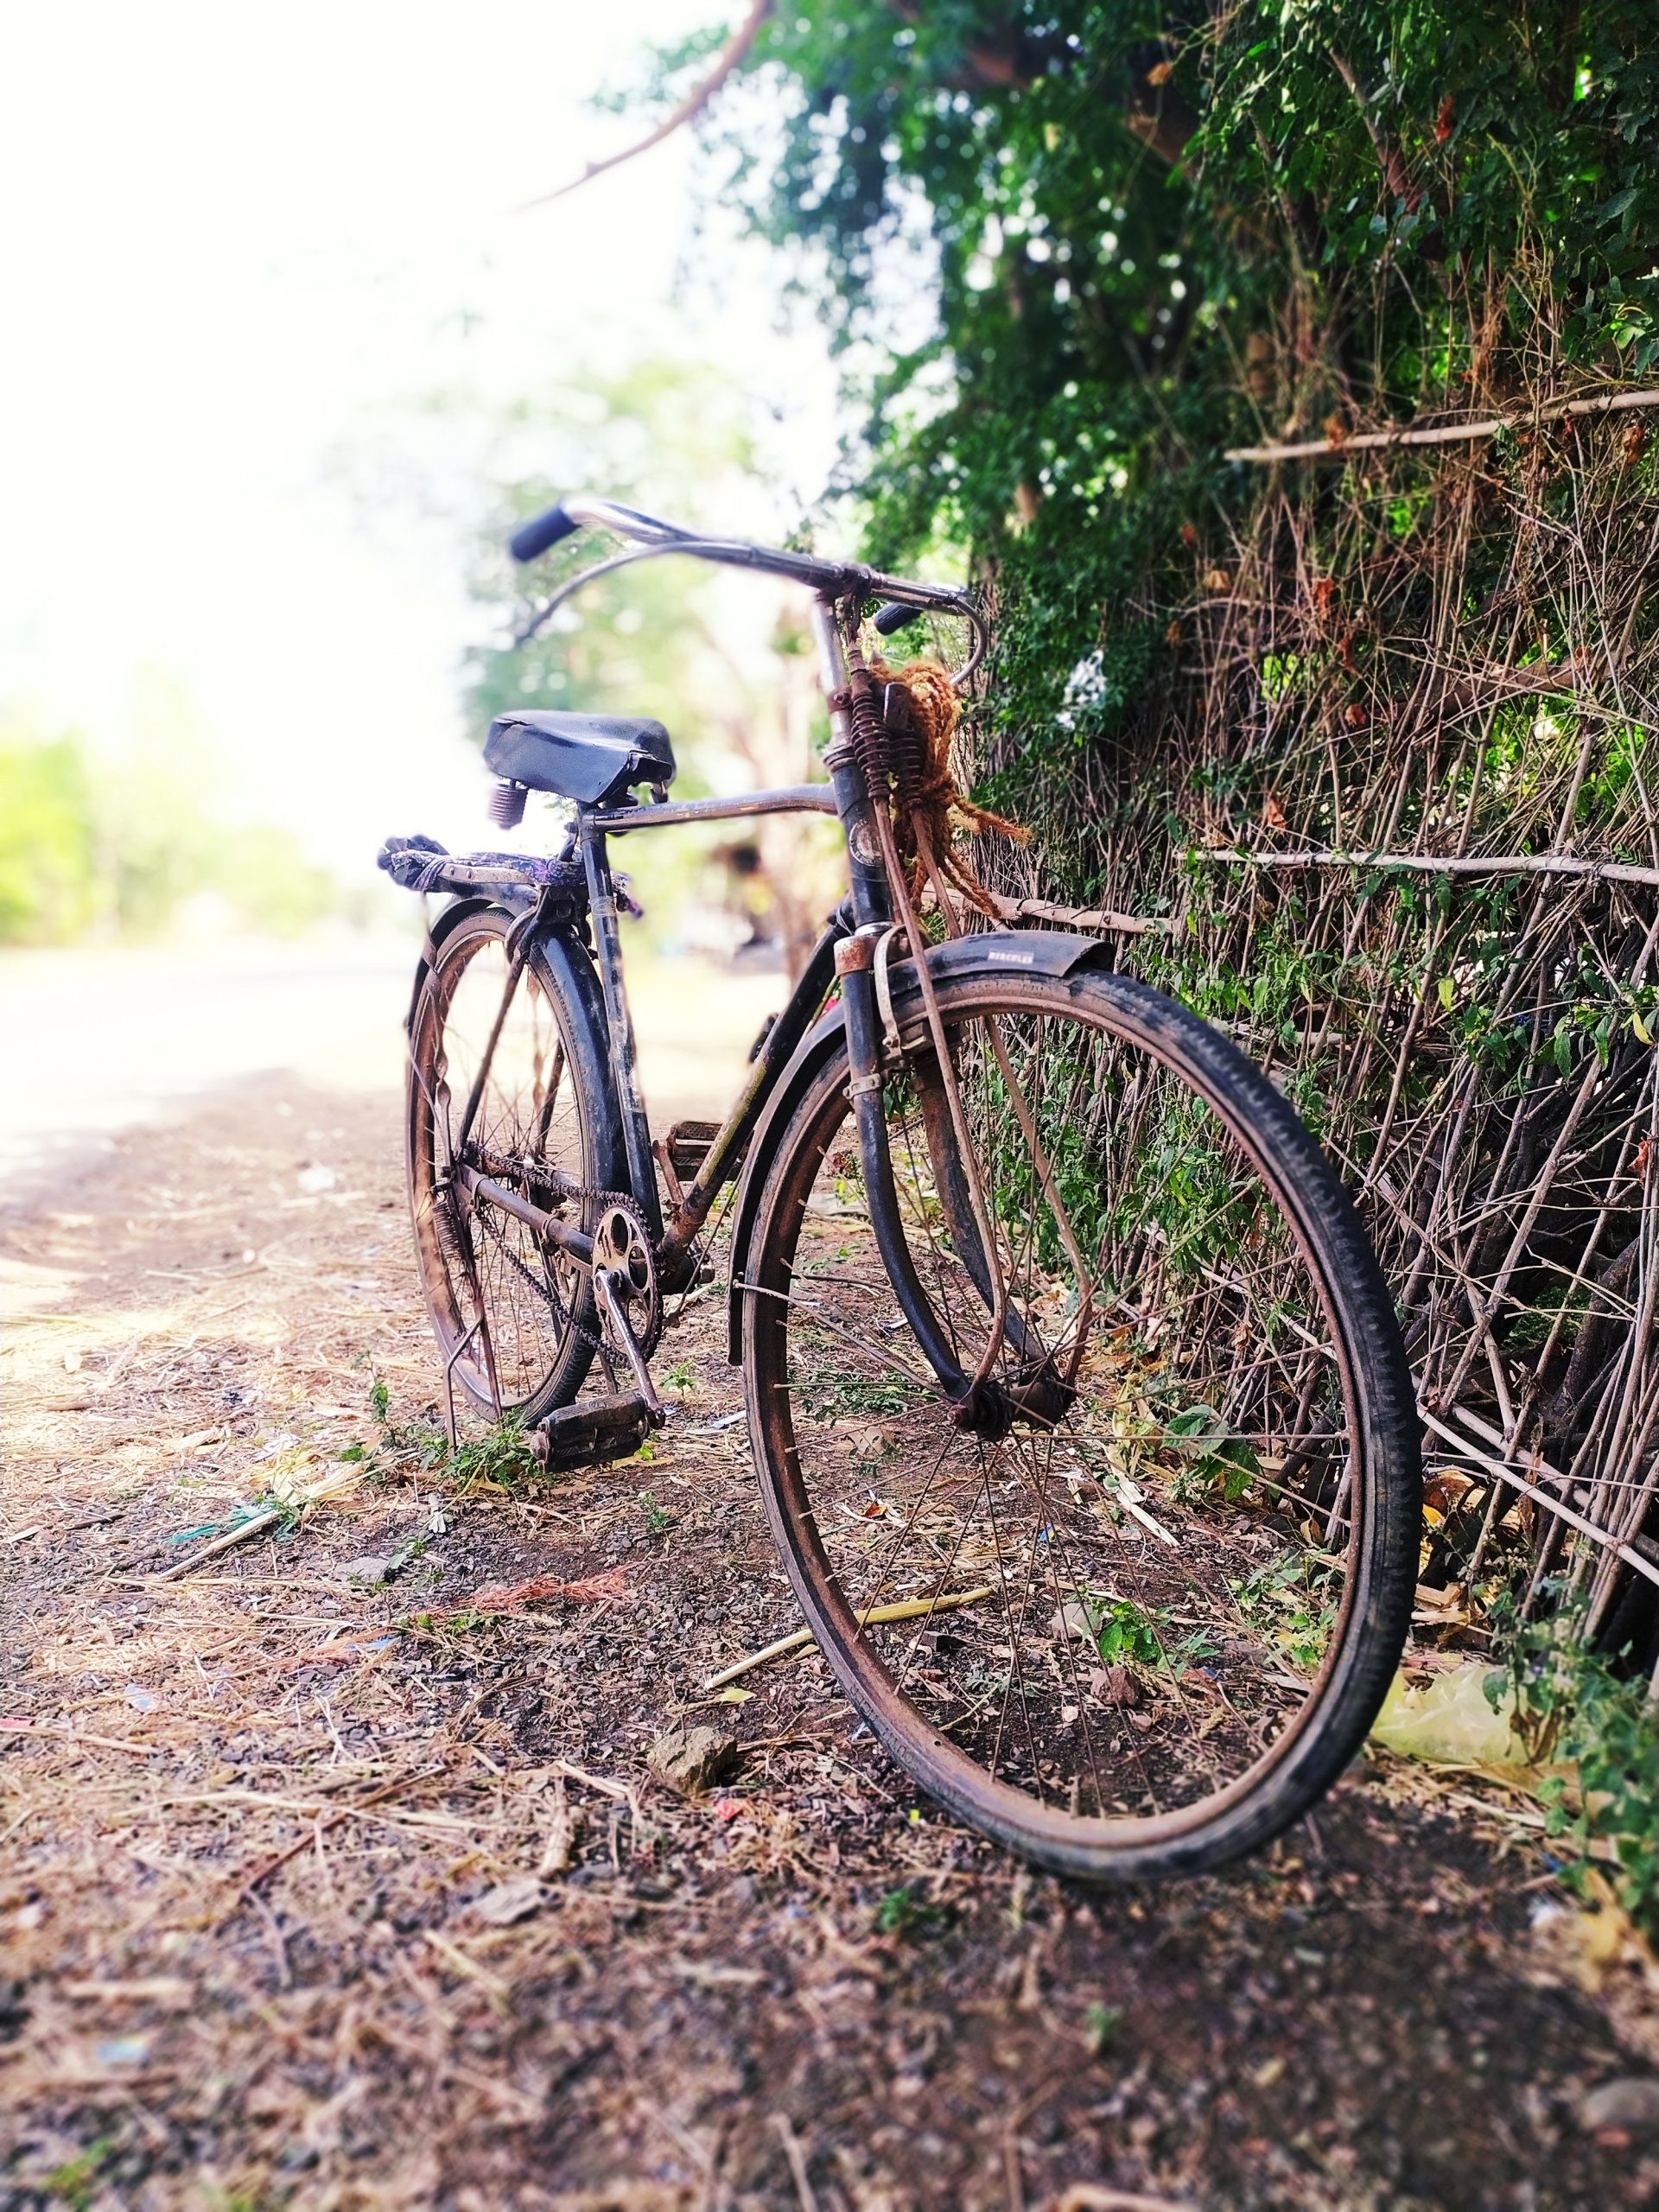 An old bicycle